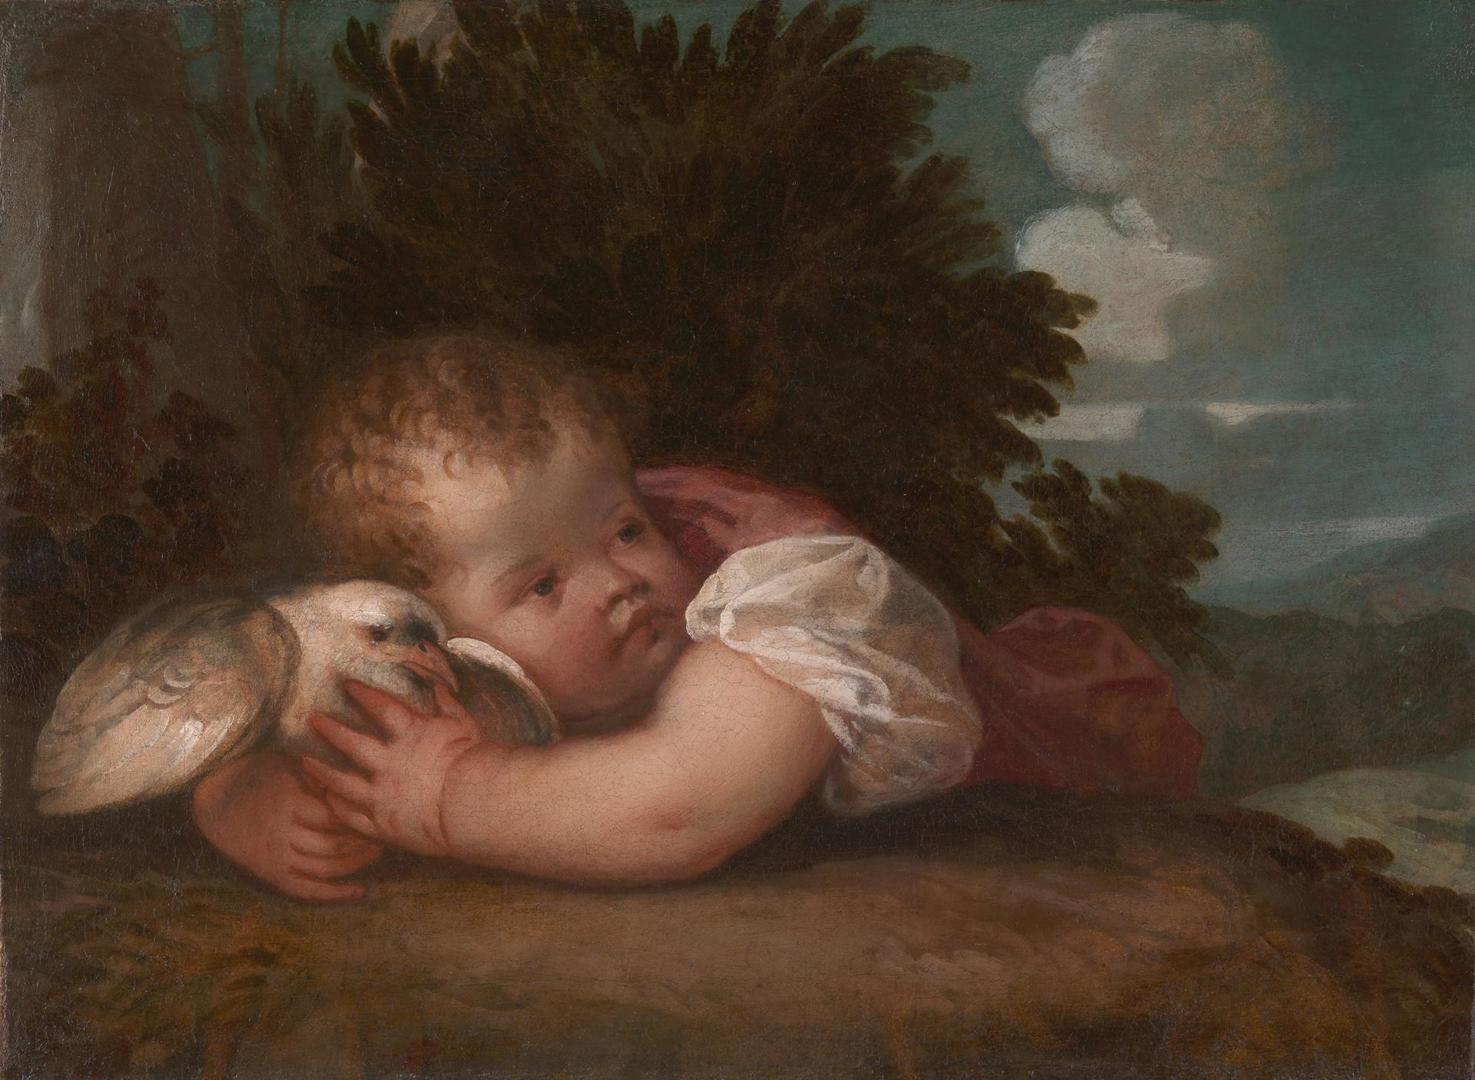 A Boy with a Bird by Titian or workshop of Titian